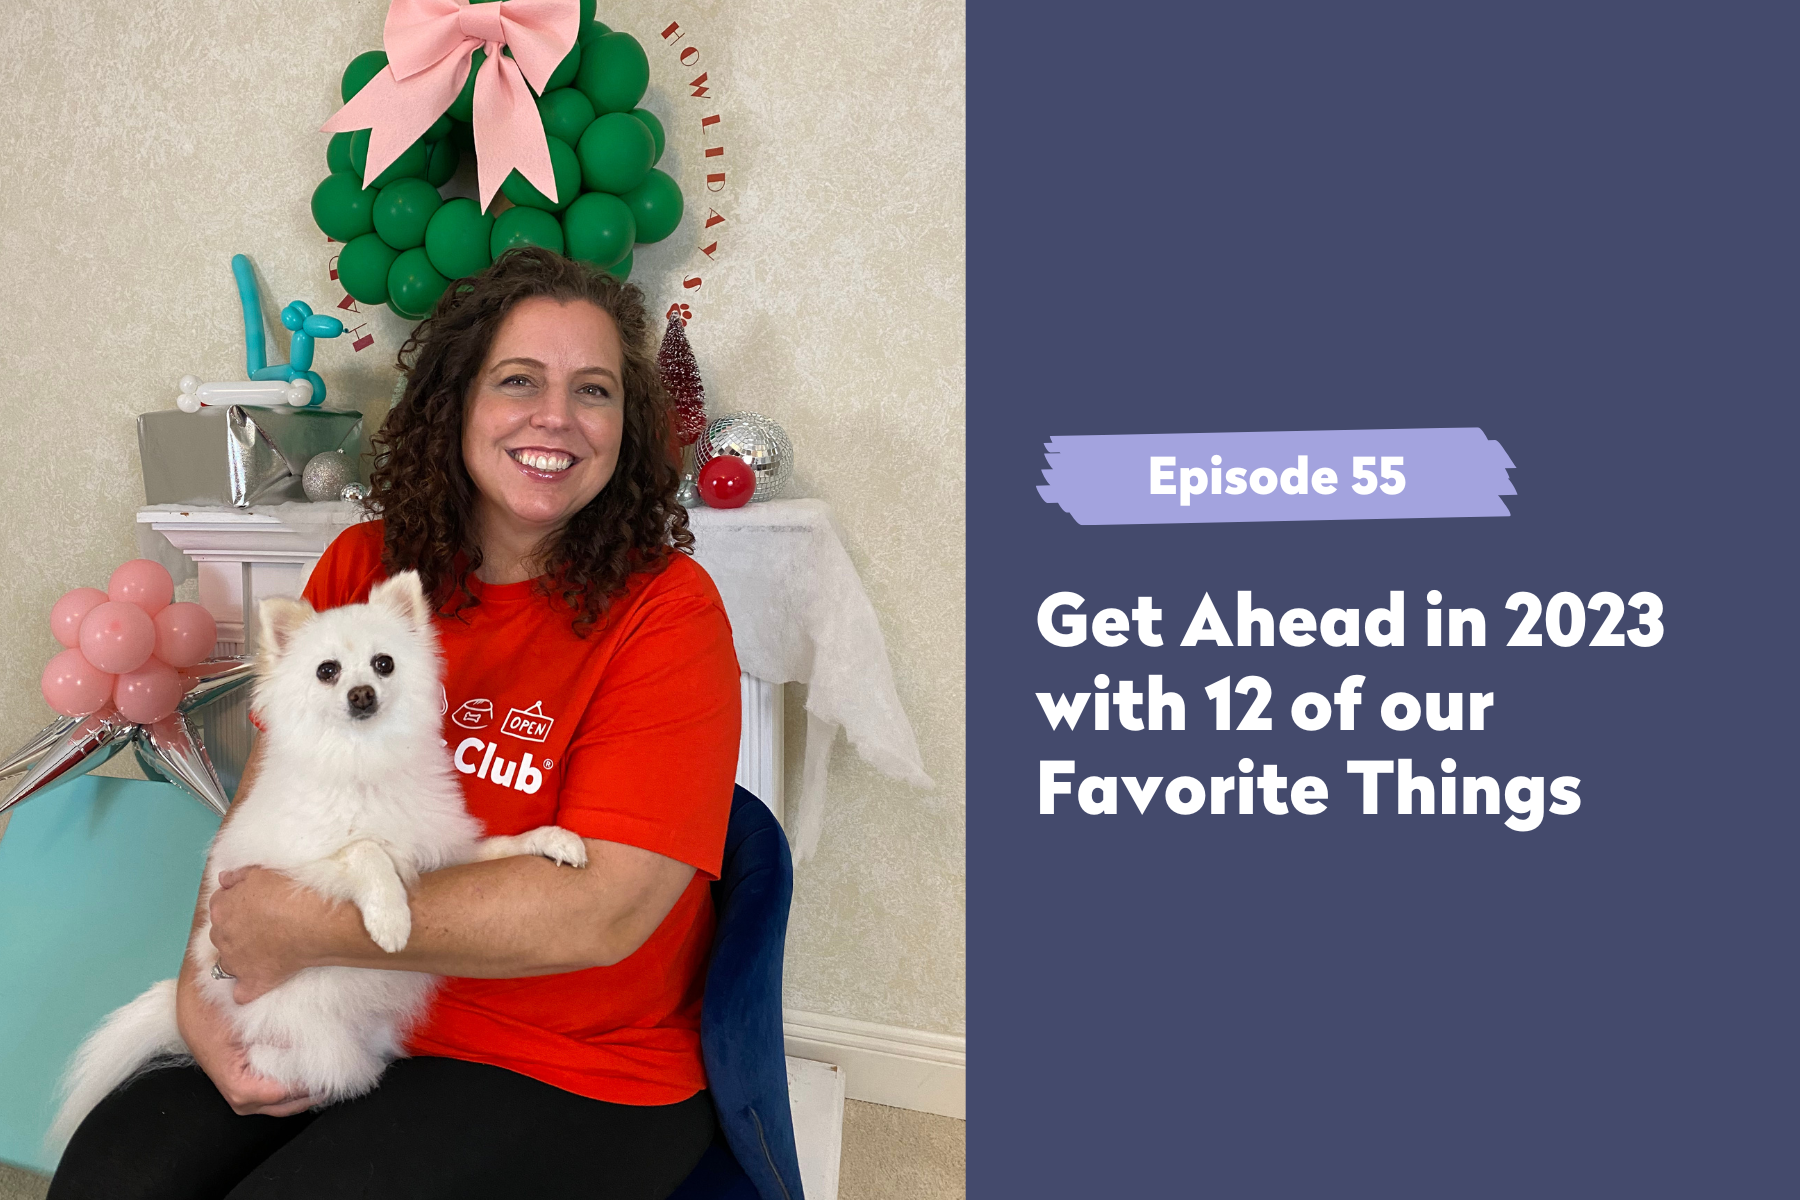 Episode 55 | Get Ahead in 2023 with 12 of our Favorite Things